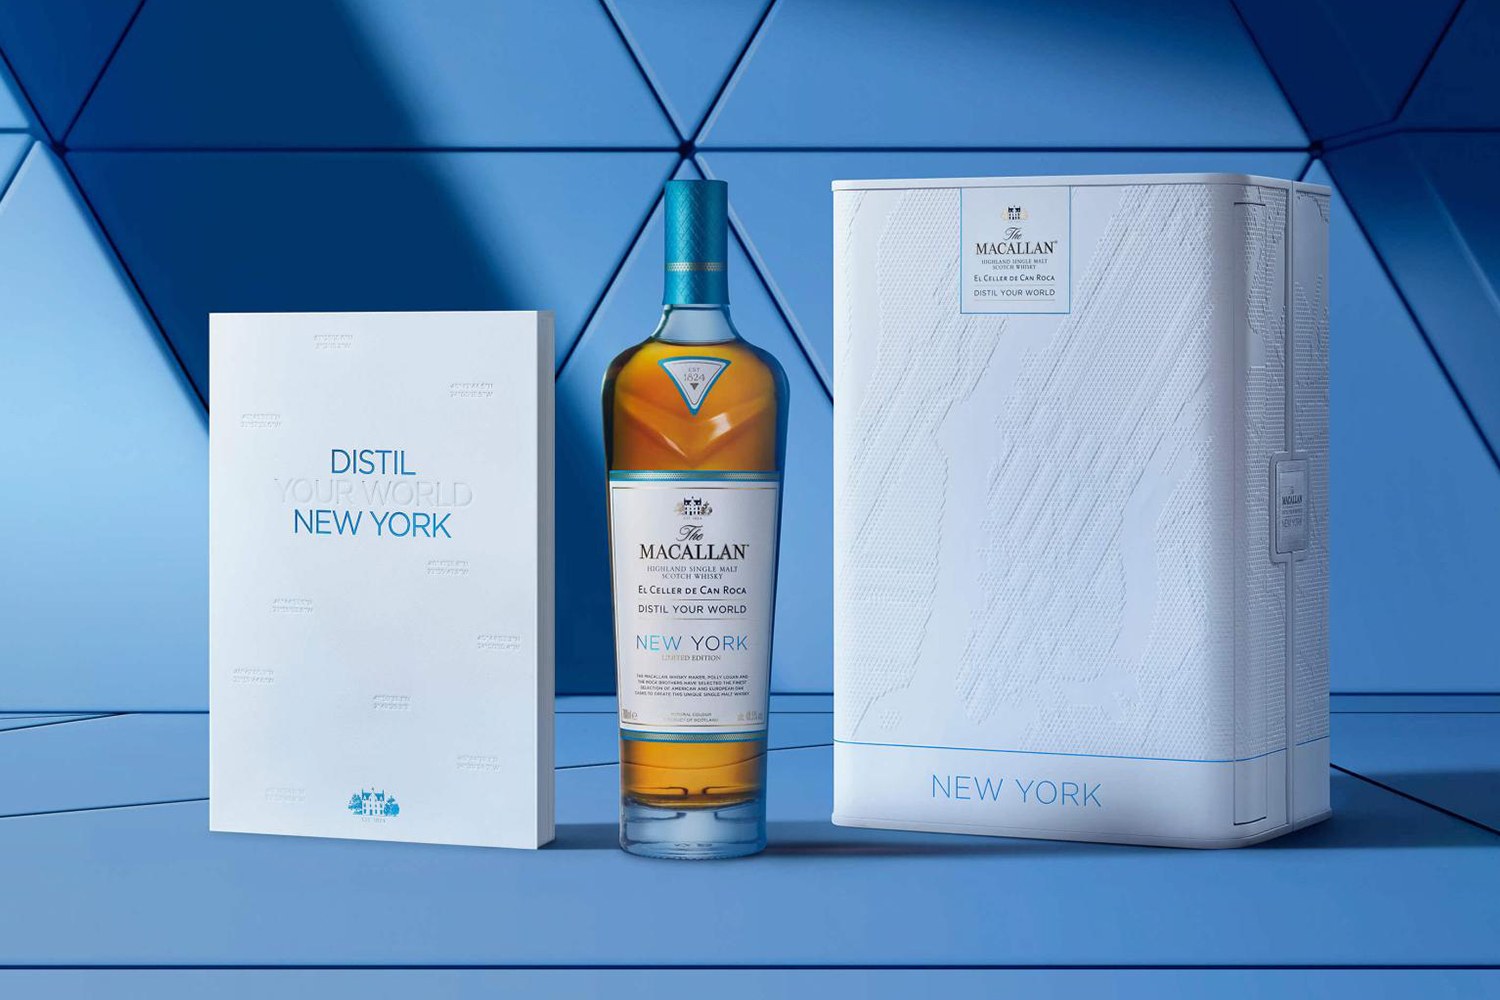 The packaging and bottle for The Macallan Distil Your World New York, available now. It's a single malt Scotch that attempts to bottle the flavors of New York City.